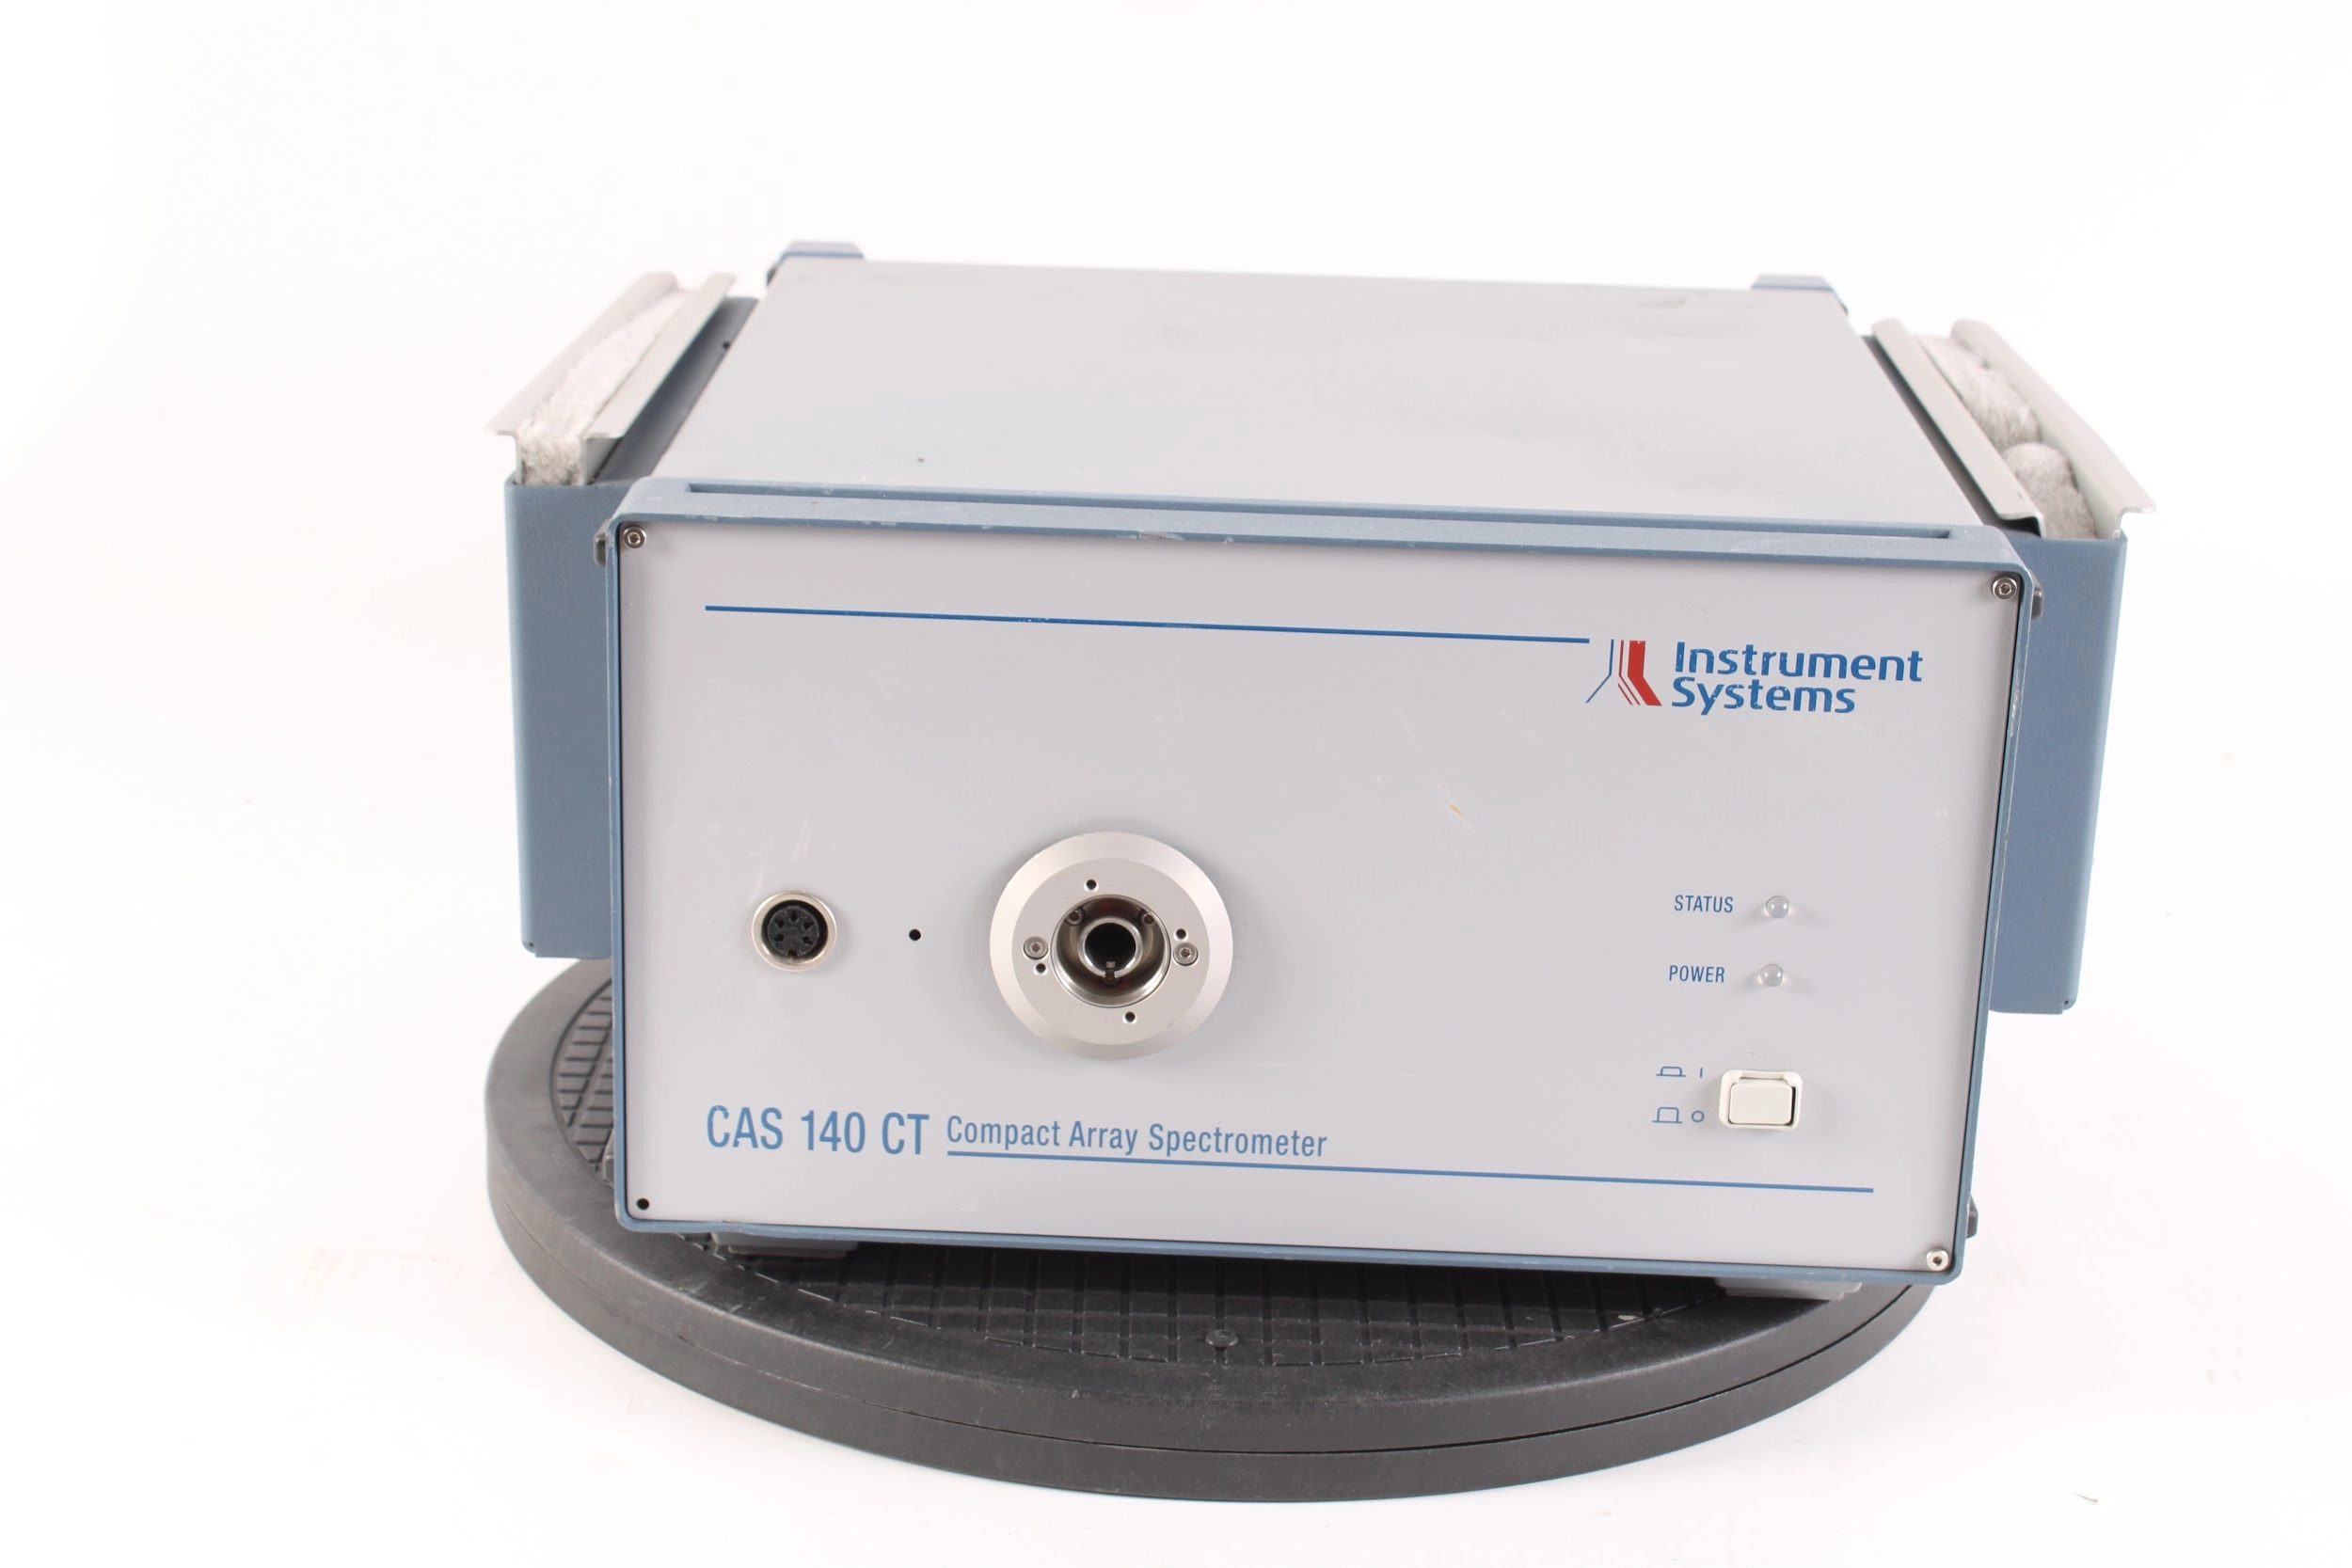 Instrument Systems CAS 140 CT Compact Array Spectrometer CAS140CT-151 Good Cond.